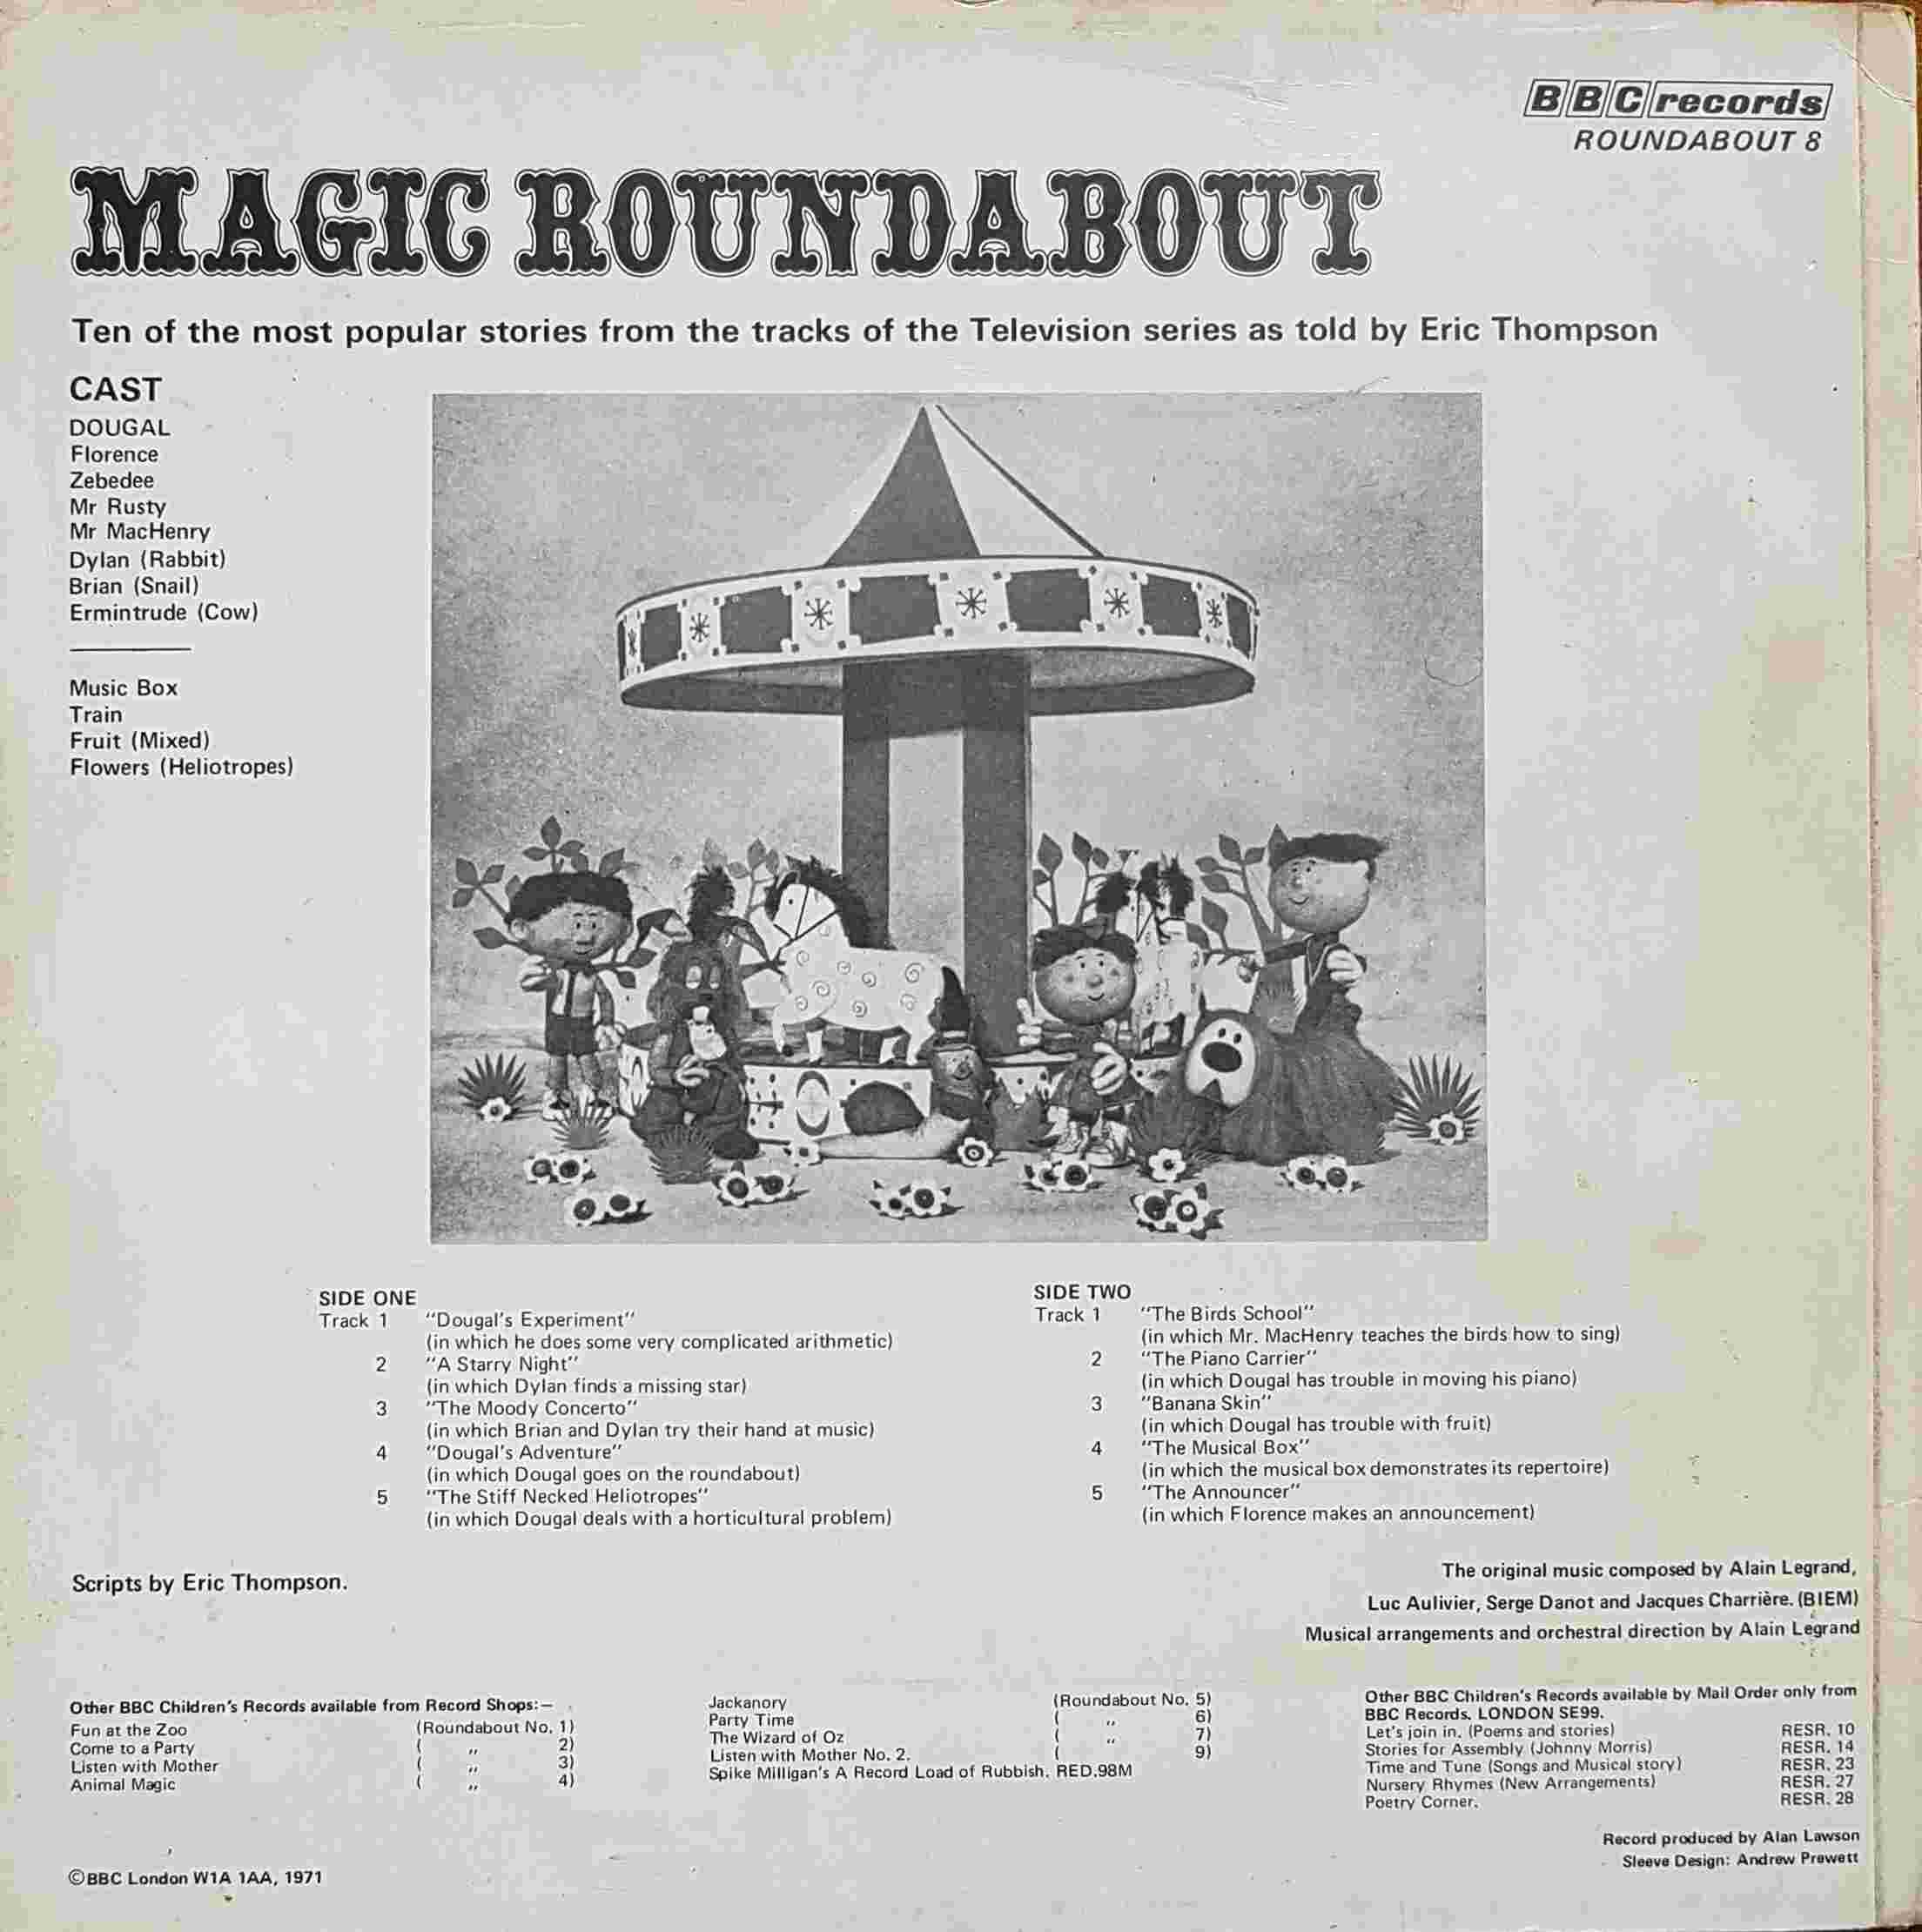 Picture of RBT 8 The magic roundabout by artist Eric Thompson from the BBC records and Tapes library